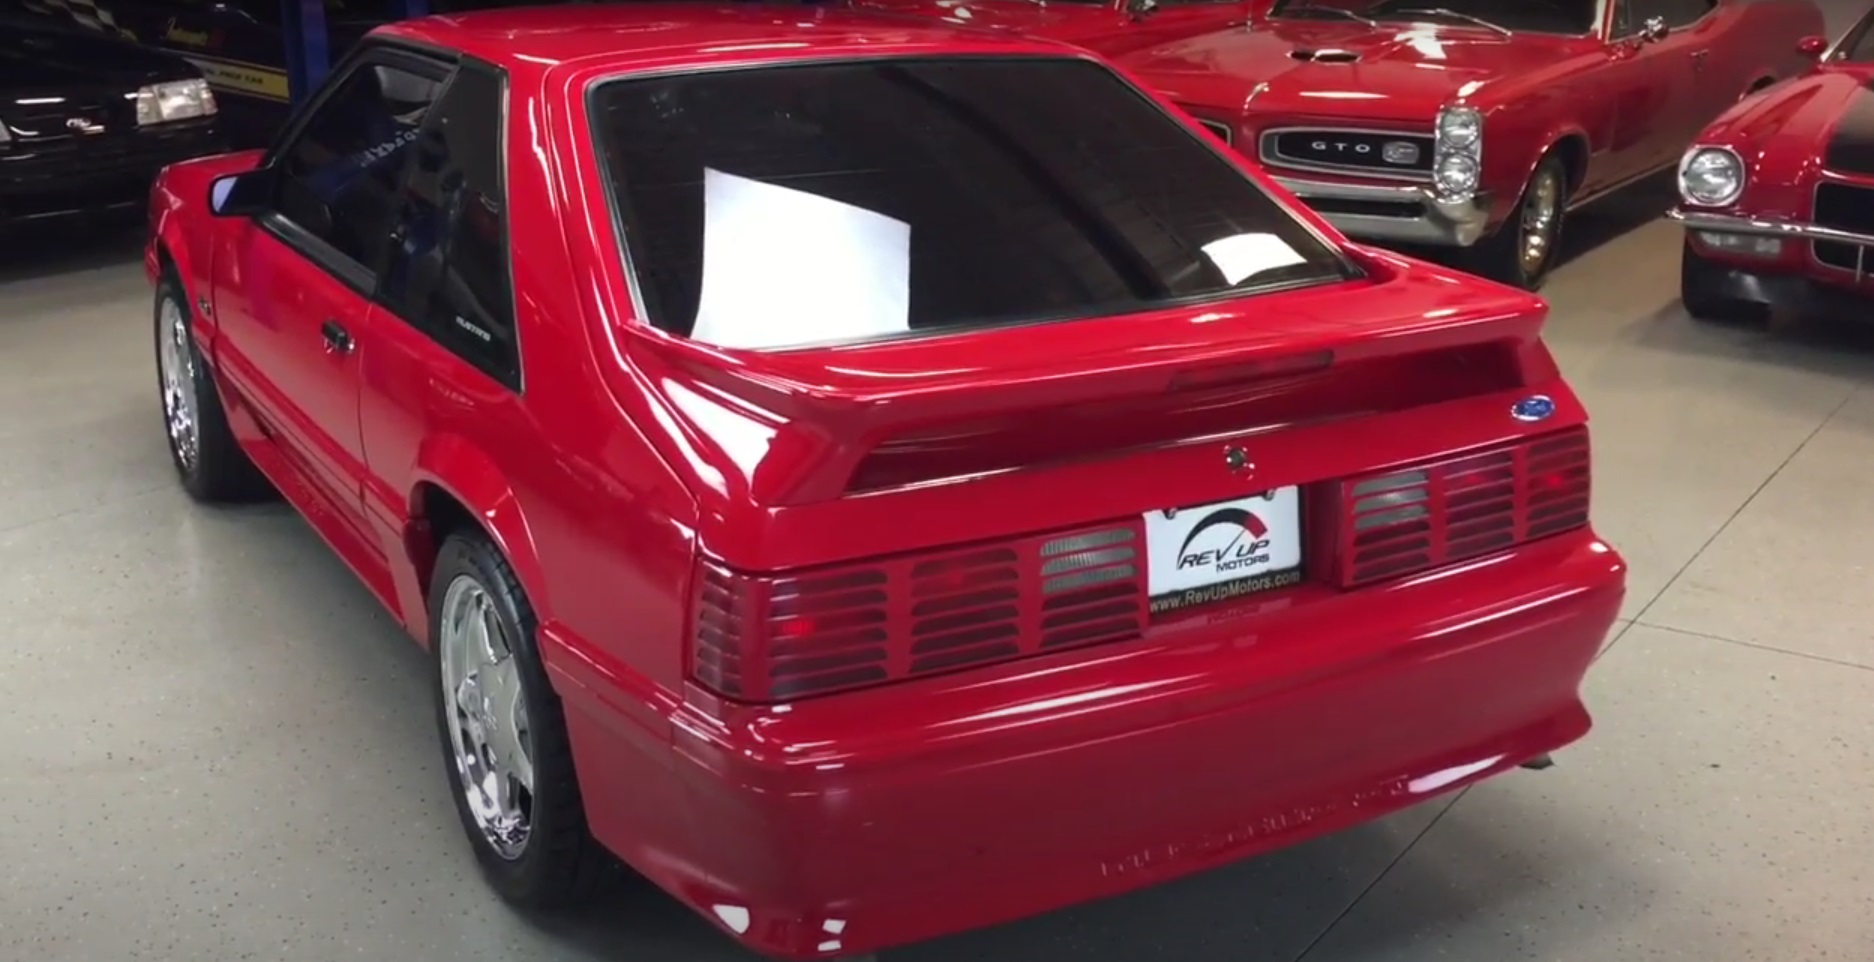 Video: 1992 Ford Mustang GT Revving Up